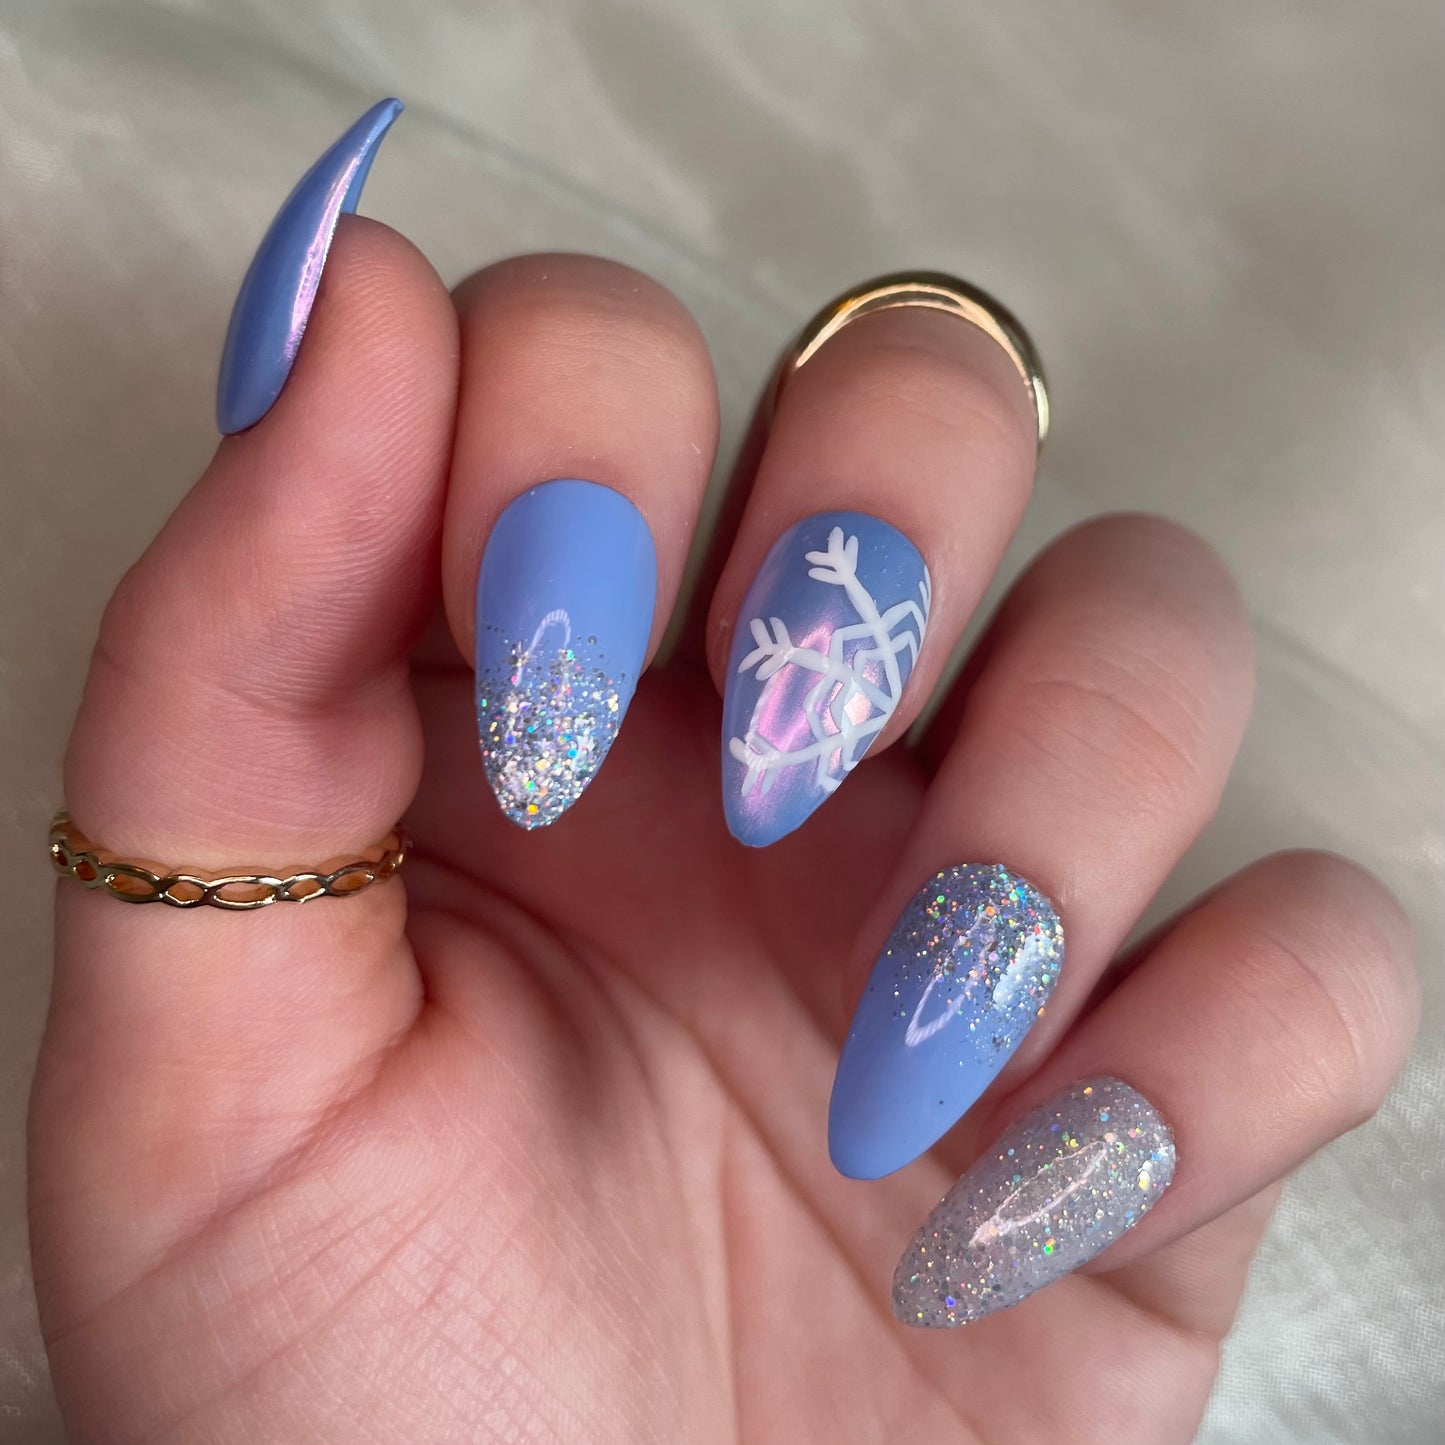 Baby Blue Snowflake Almond Nails with Glitter Ombré and Chrome Design